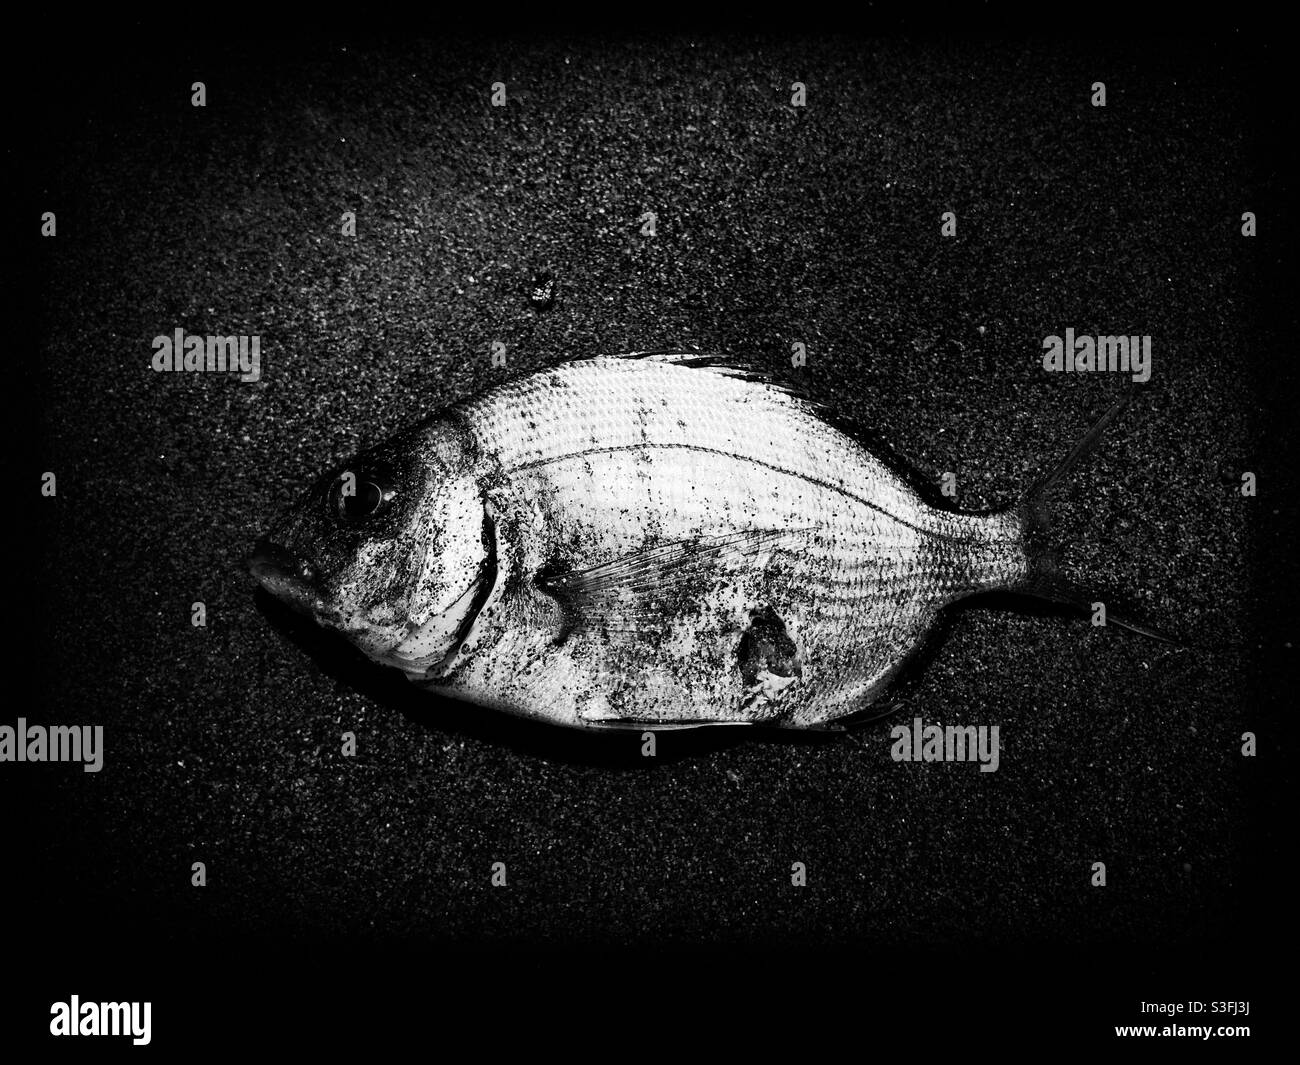 Black and white image of a small sea bream washed ashore Stock Photo